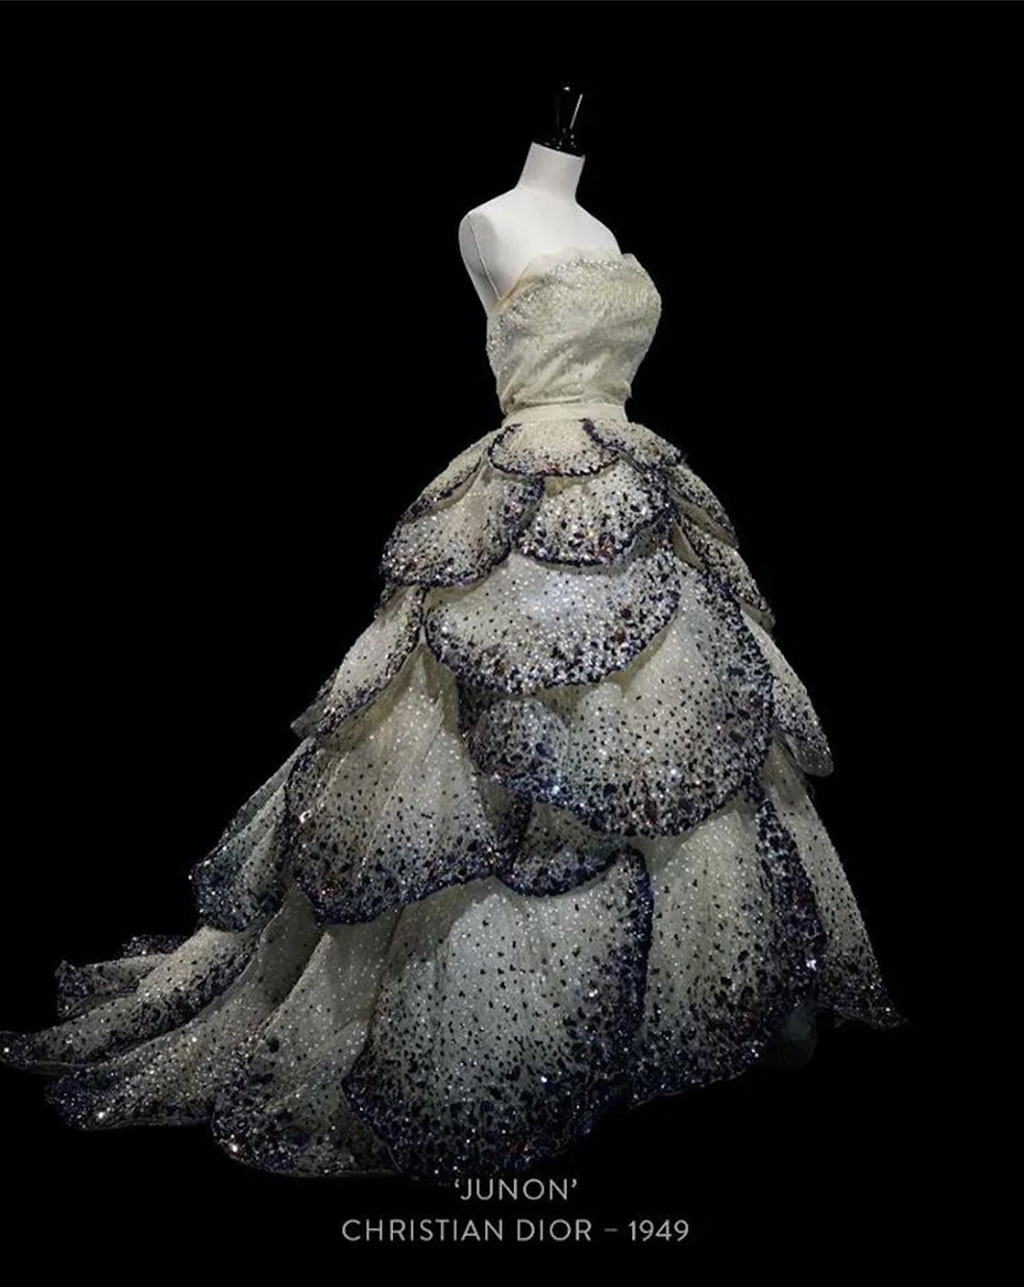 Natalie Portman Revived One Of The Most Famous Dior Gowns Of All Time In  Cannes  British Vogue